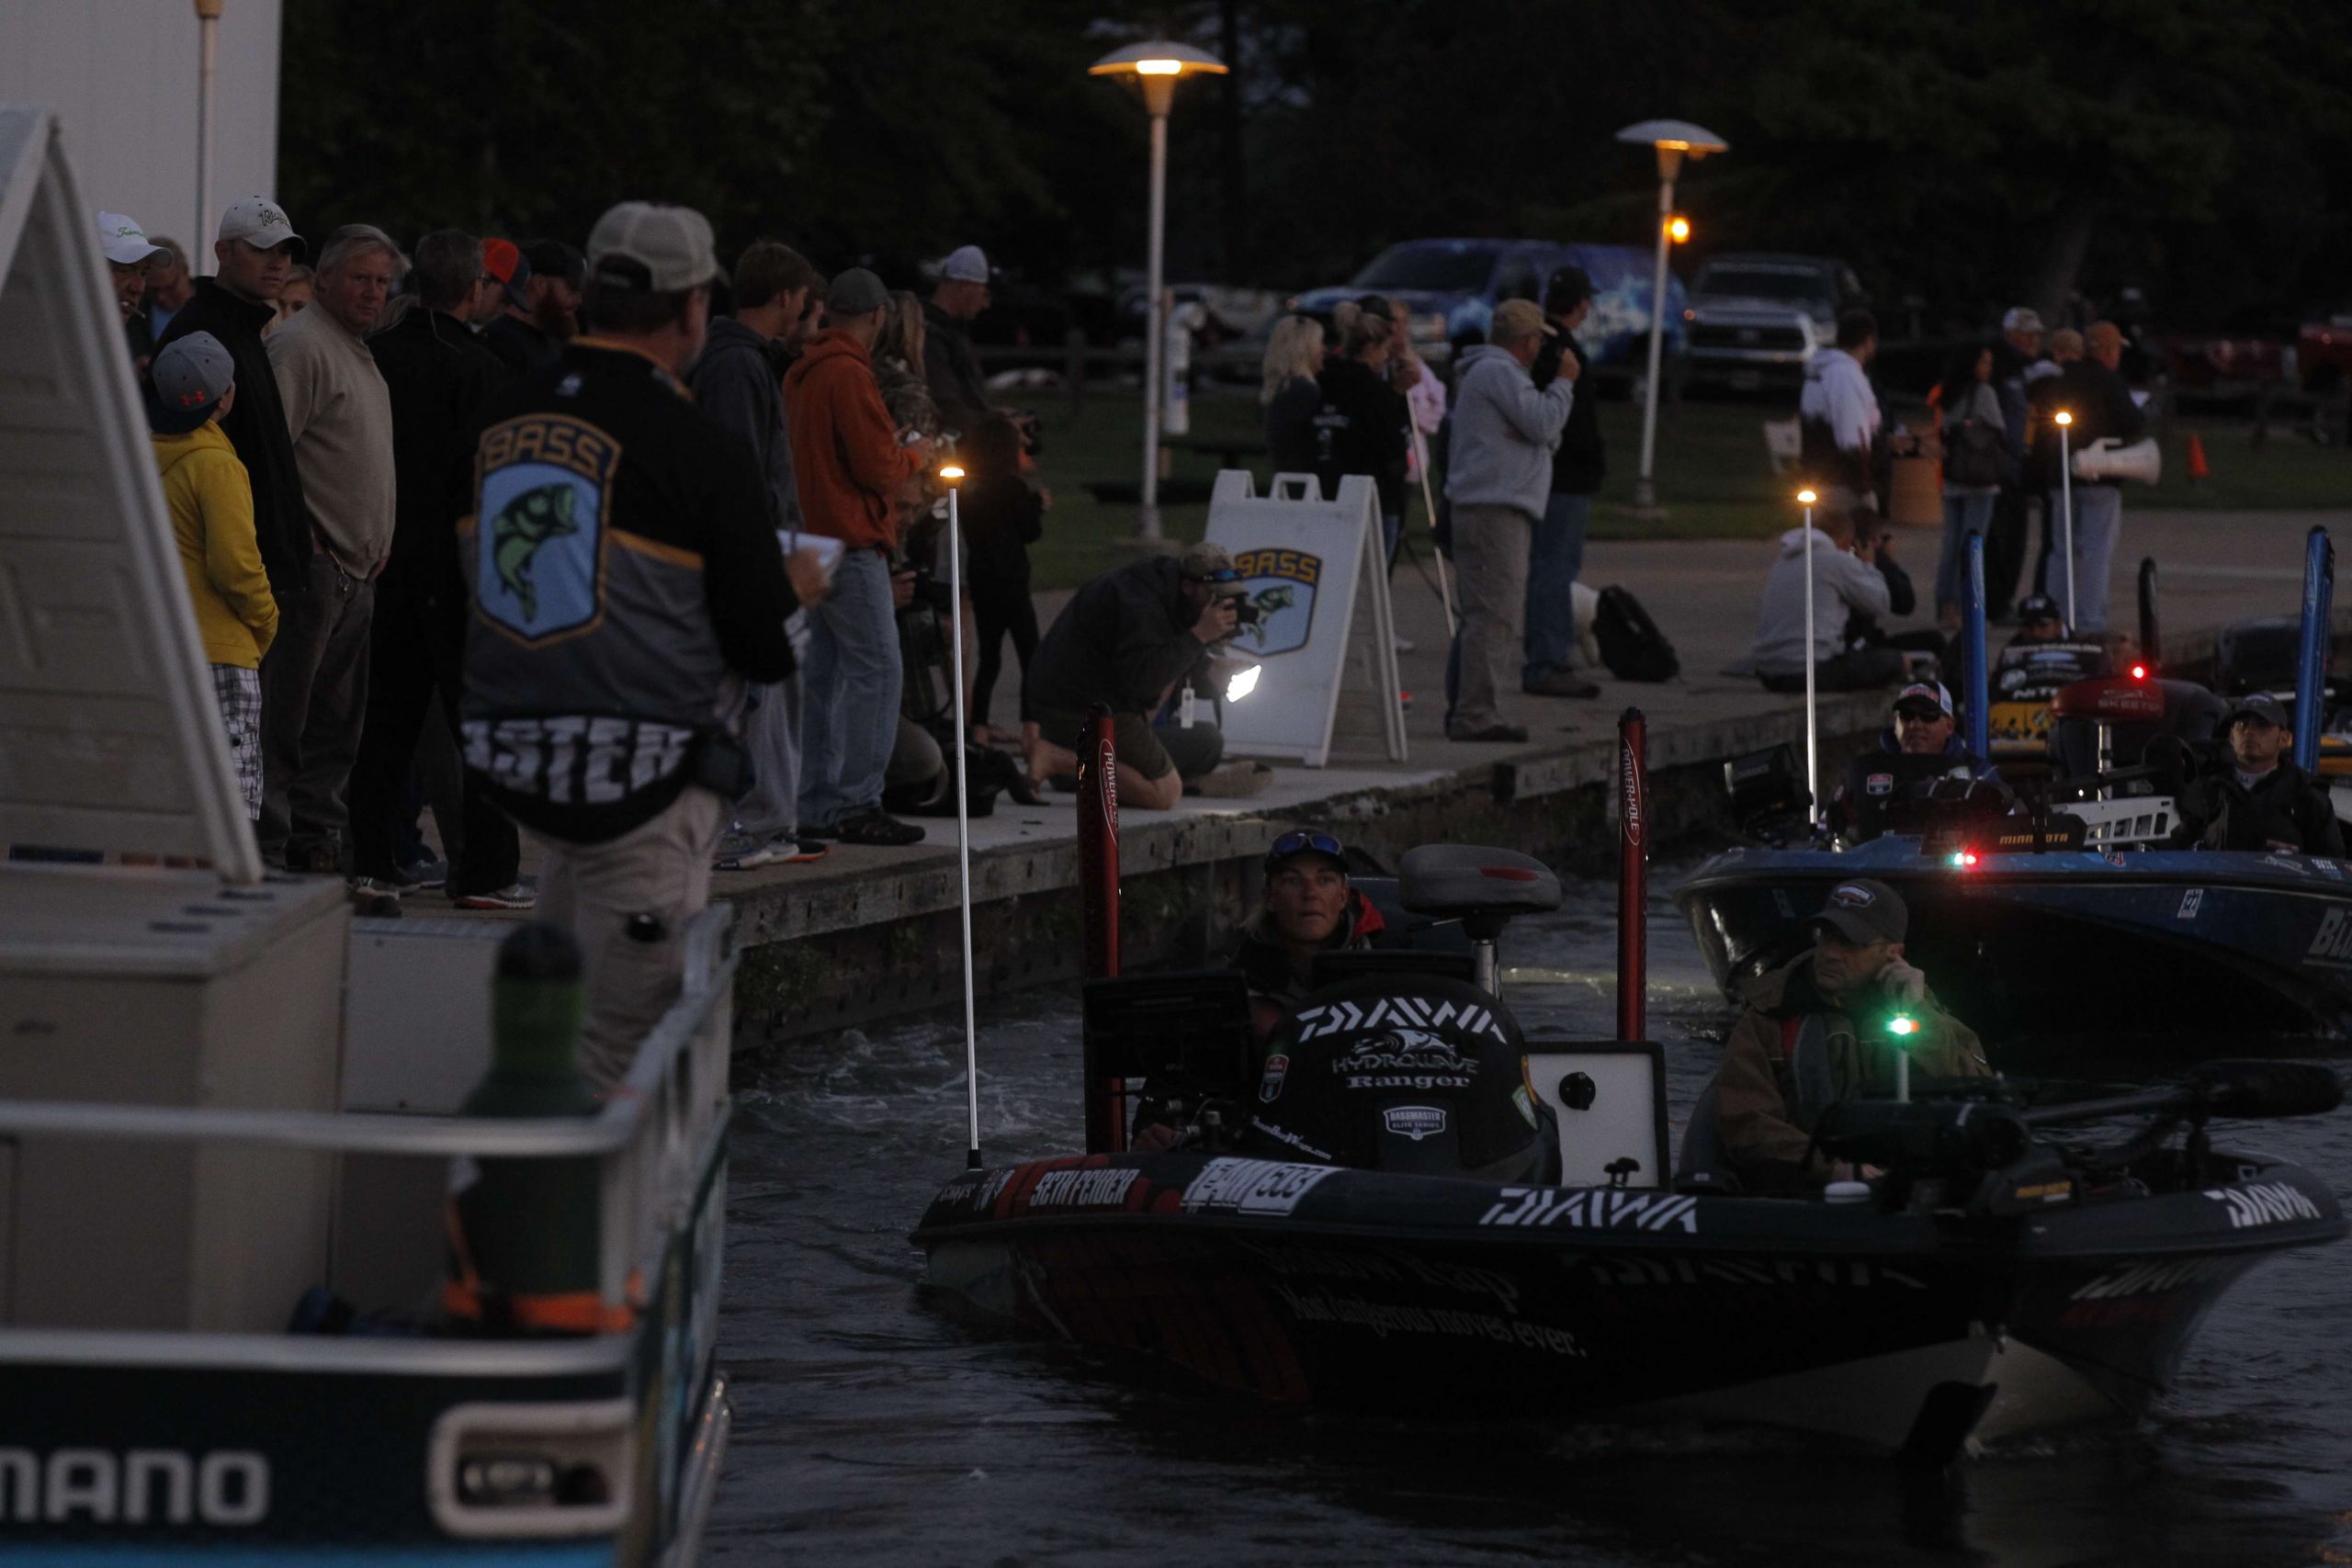 Anxious and excited Bassmaster fans line the dock.